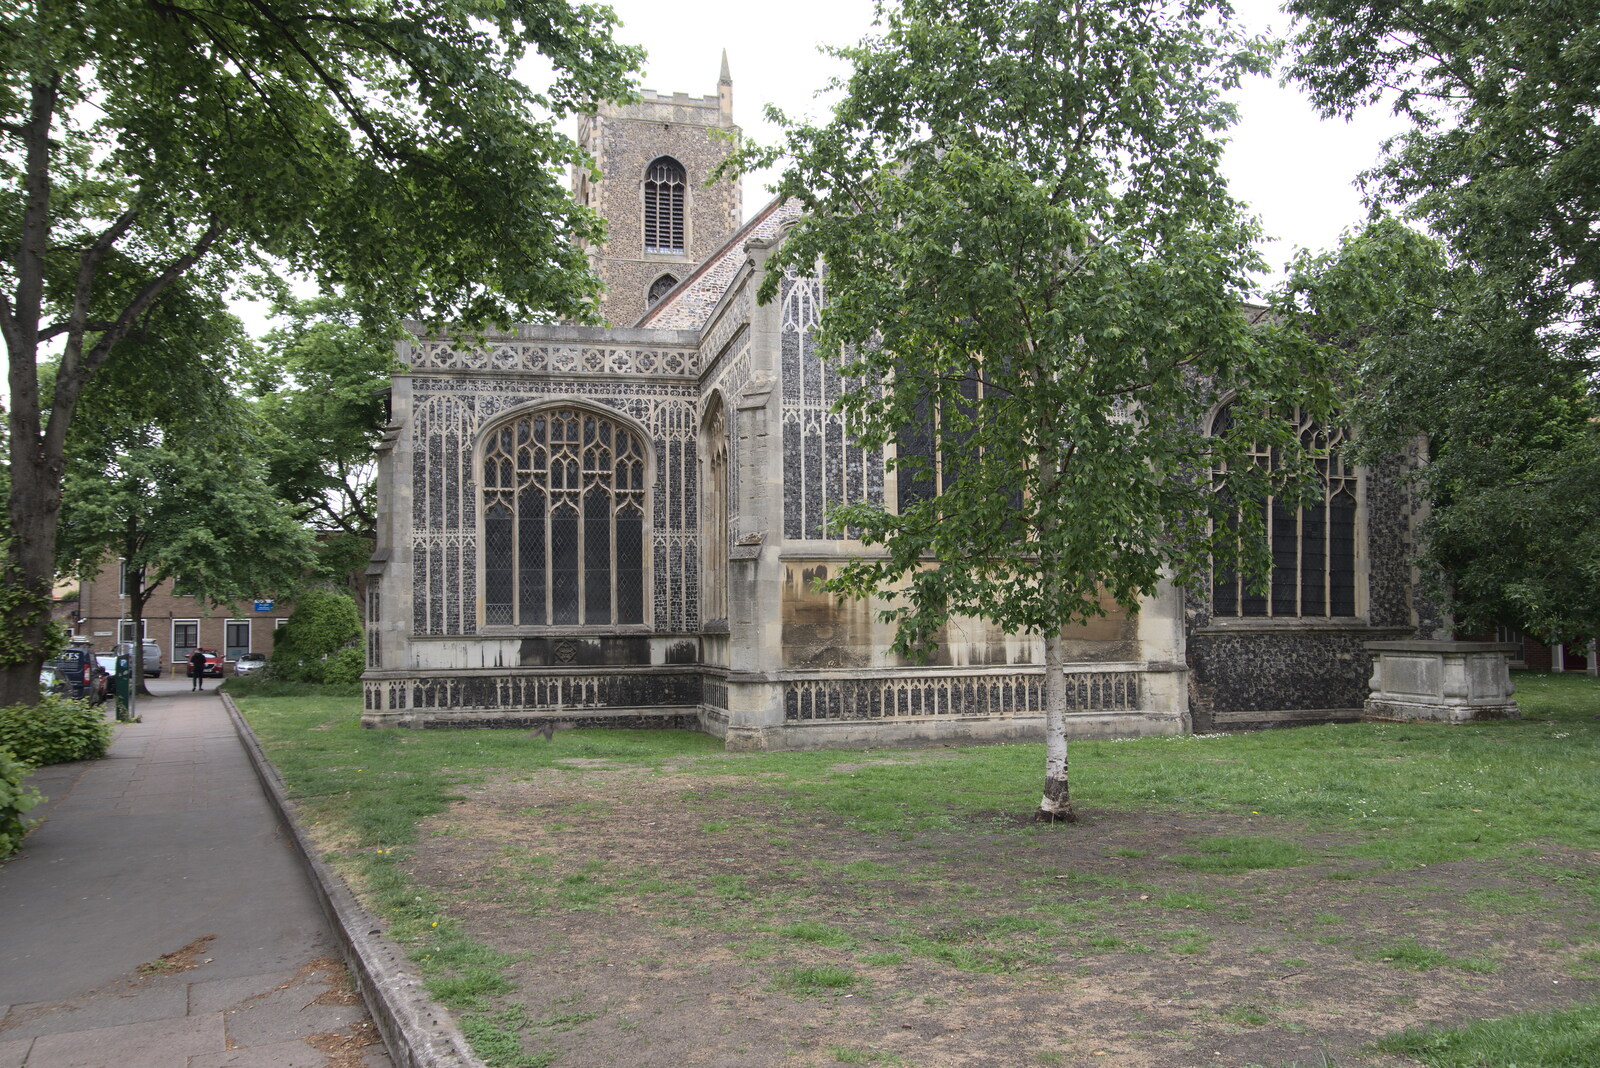 The old St. Michael's Church on Oak Street from Discovering the Hidden City: Norwich, Norfolk - 23rd May 2022